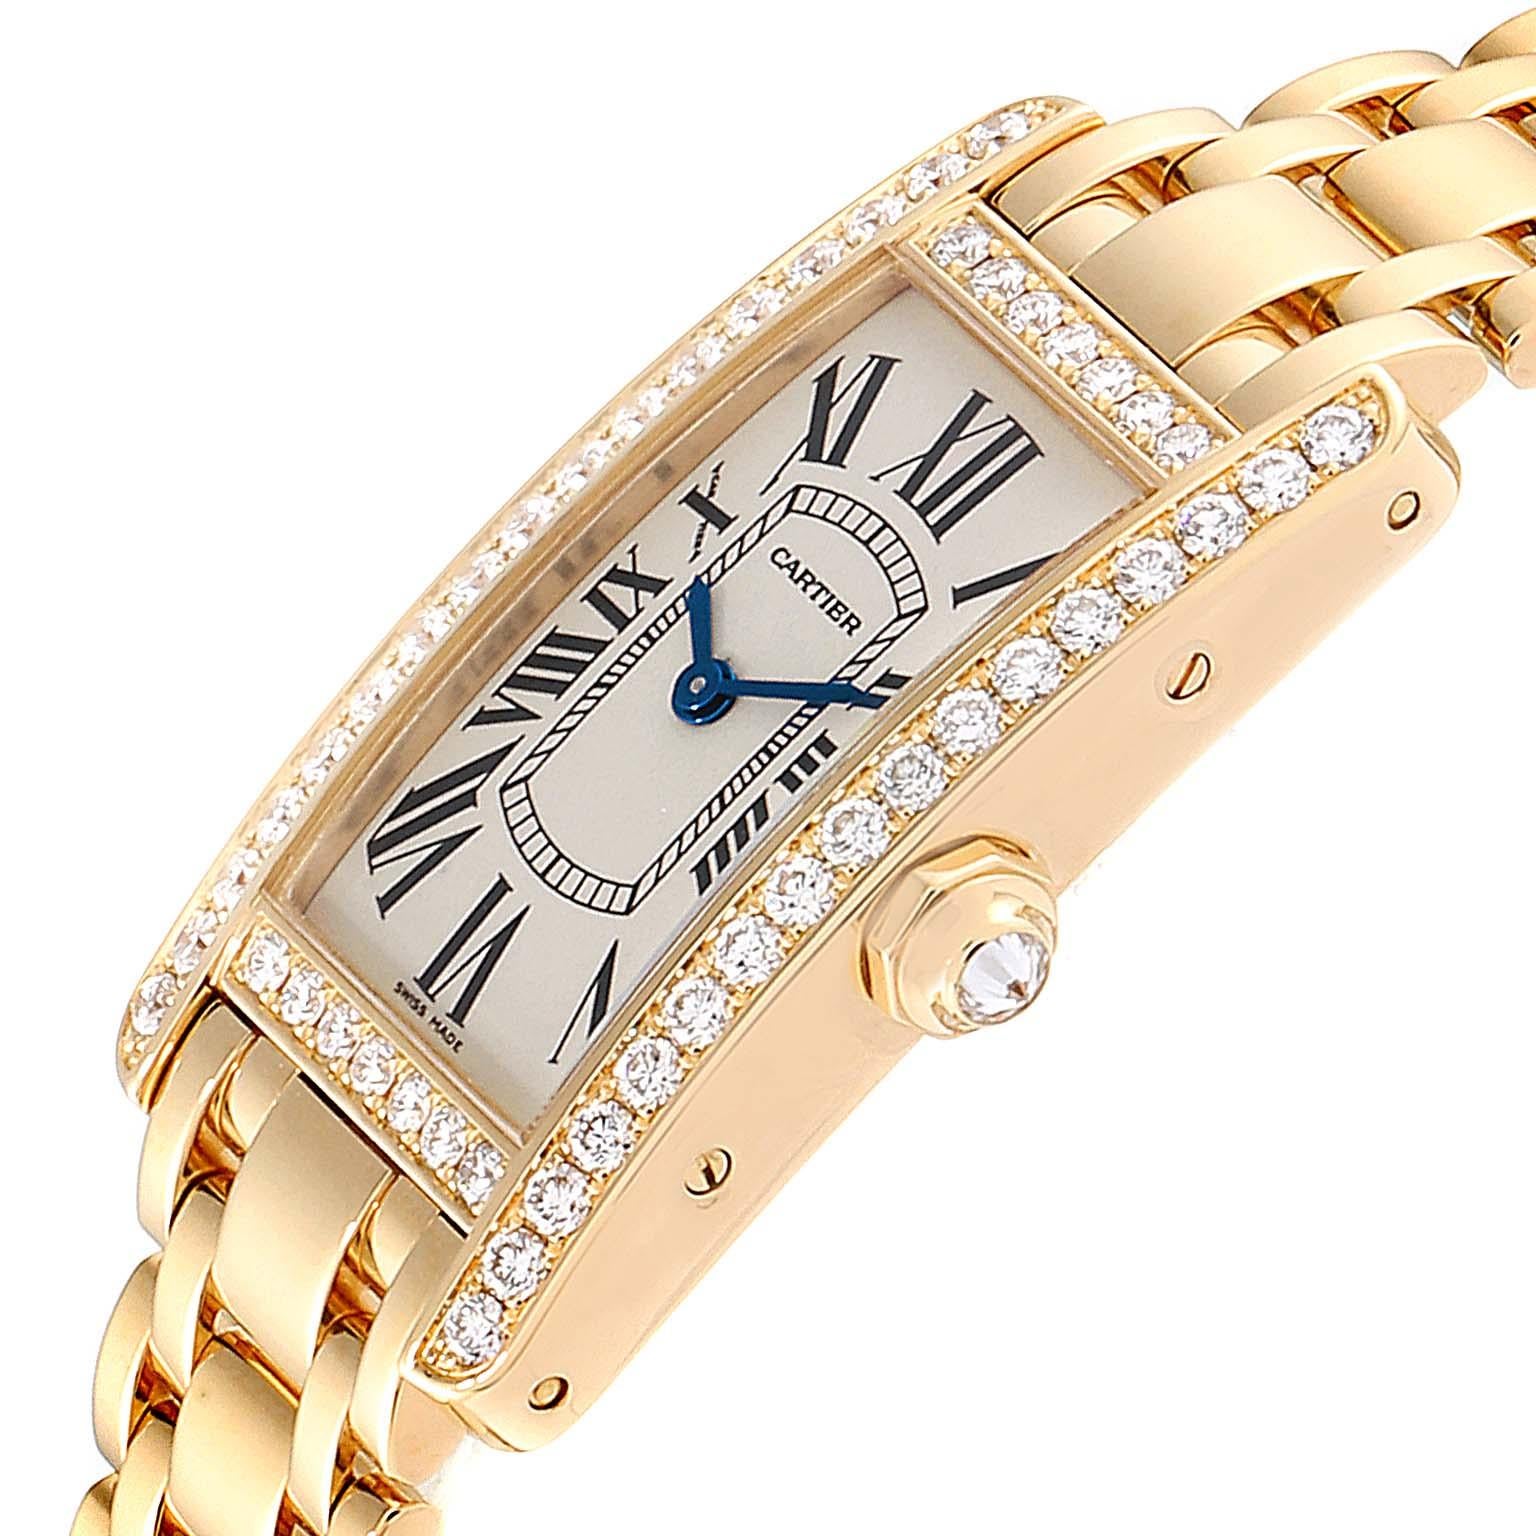 Women's Cartier Tank Americaine Yellow Gold Diamond Ladies Watch WB7072K2 Box Papers For Sale